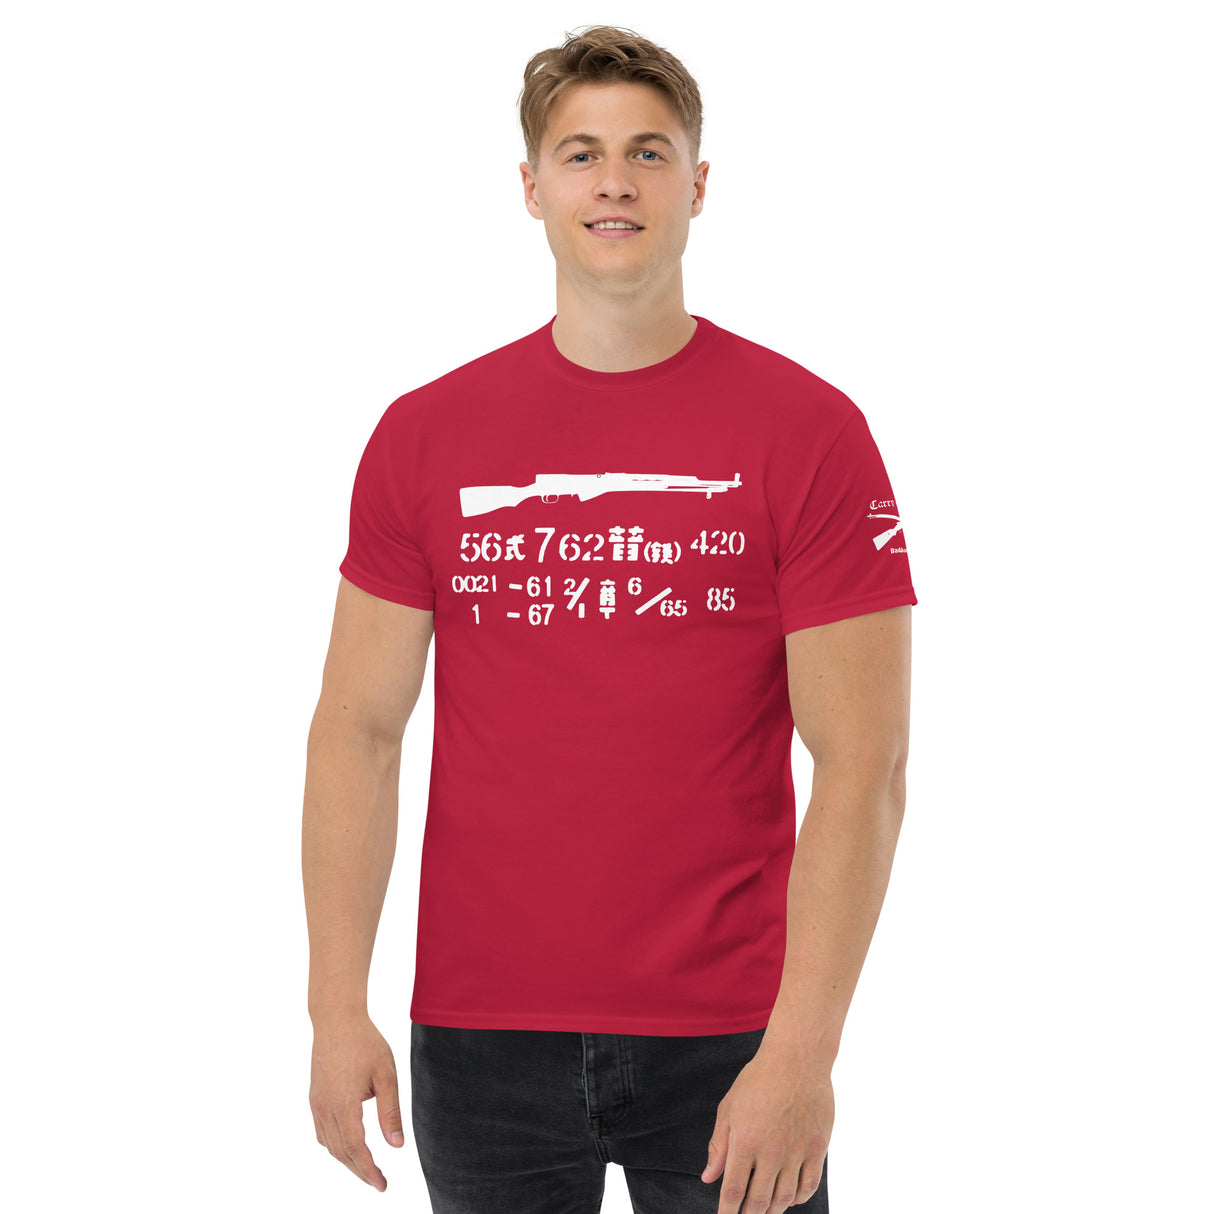 Type 56 SKS Chinese carbine cotton T-shirt with ammo spam can labels - light font